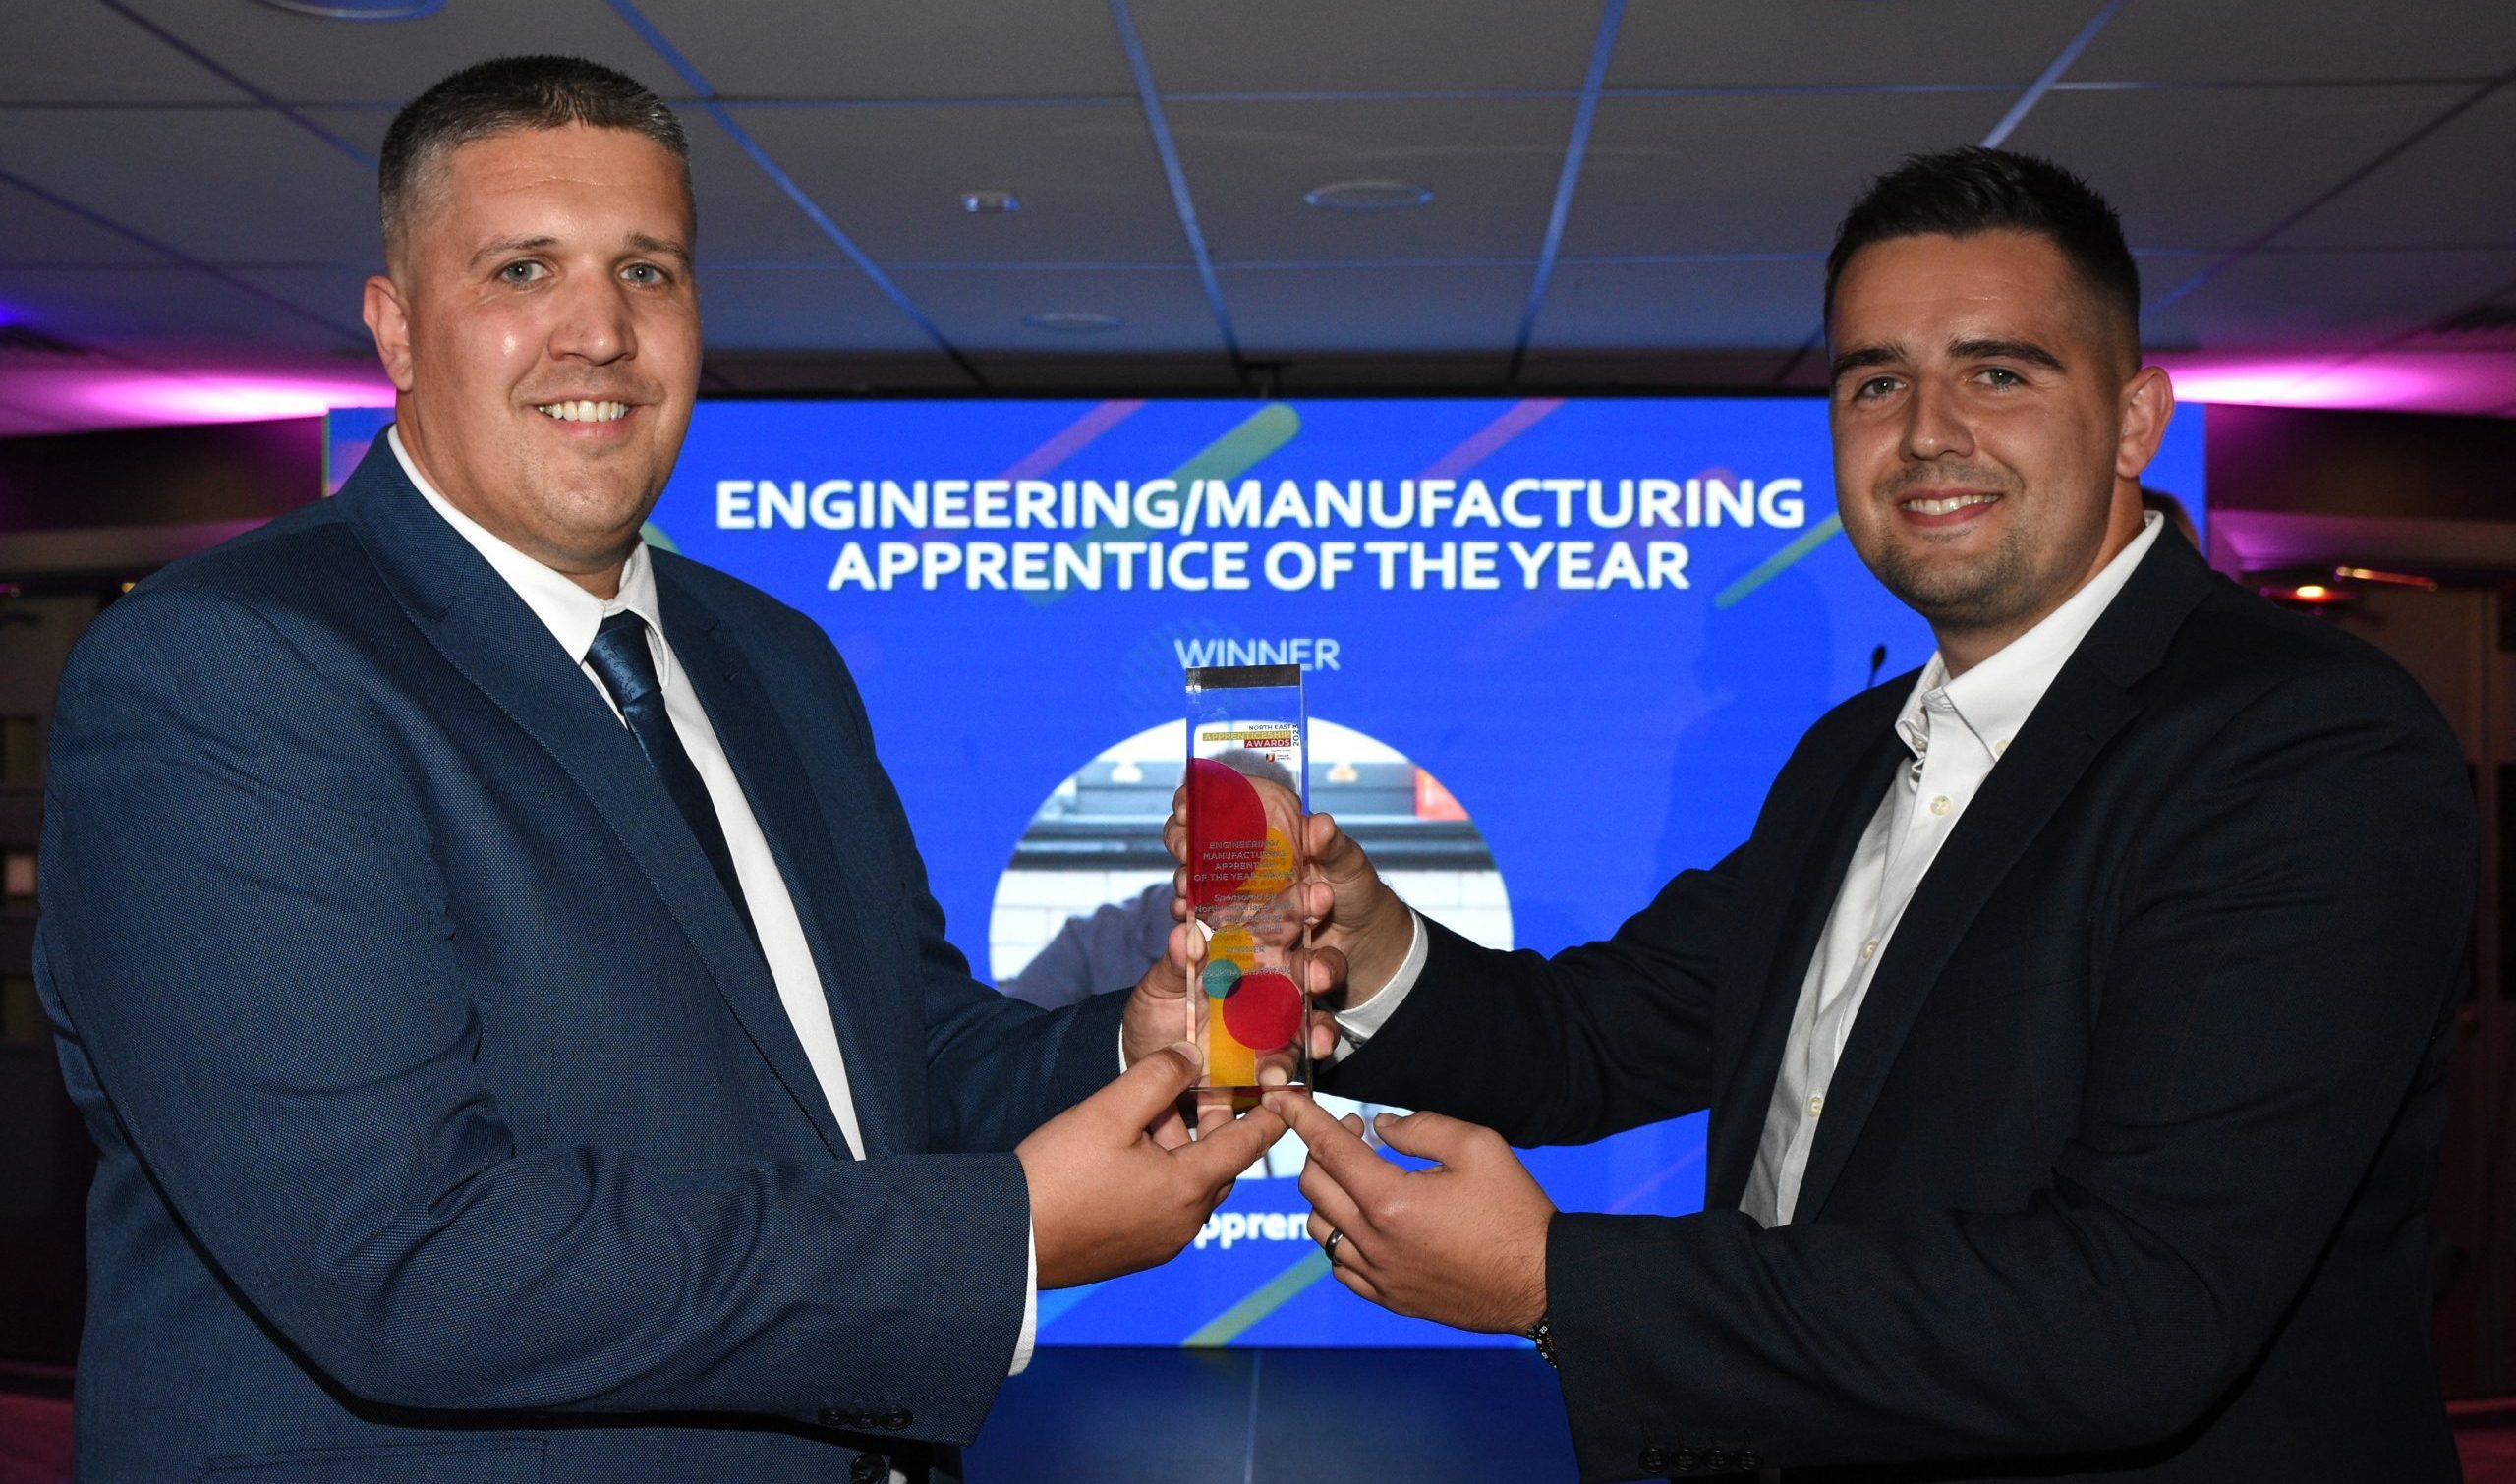 North East Apprenticeship Awards Success for BDN Engineer